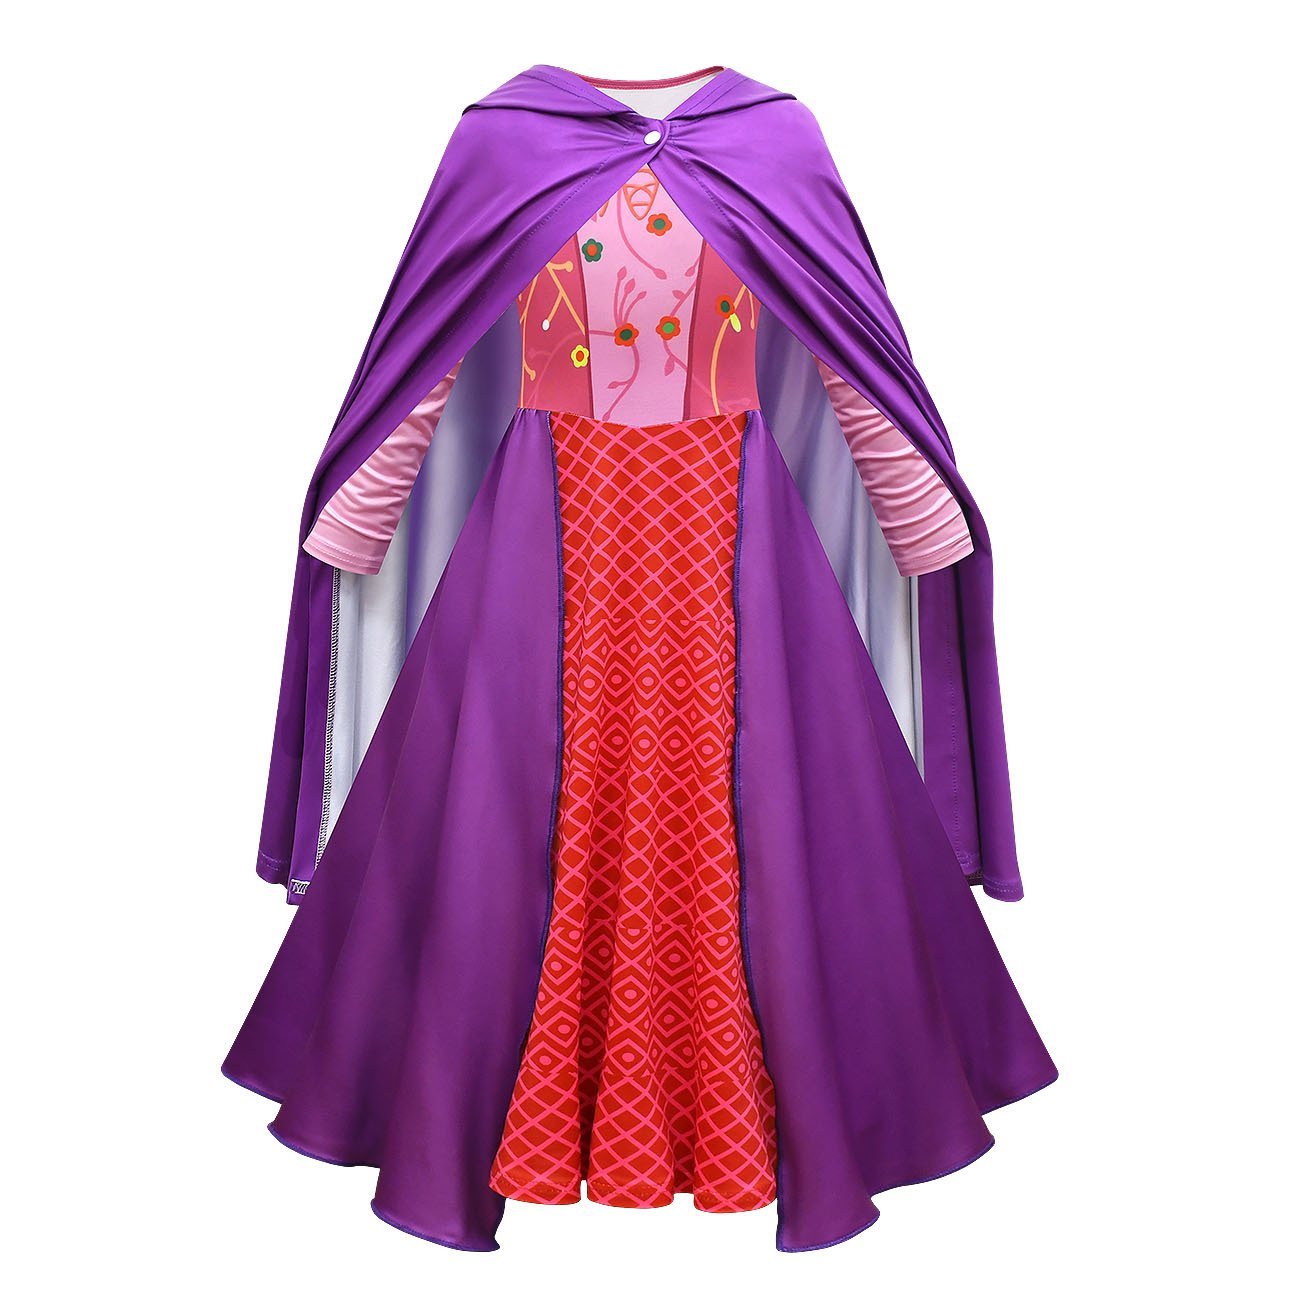 Girls' Hocus Pocus Sarah Sanderson Cosplay Costumes long dress cape Halloween Outfit For Kids